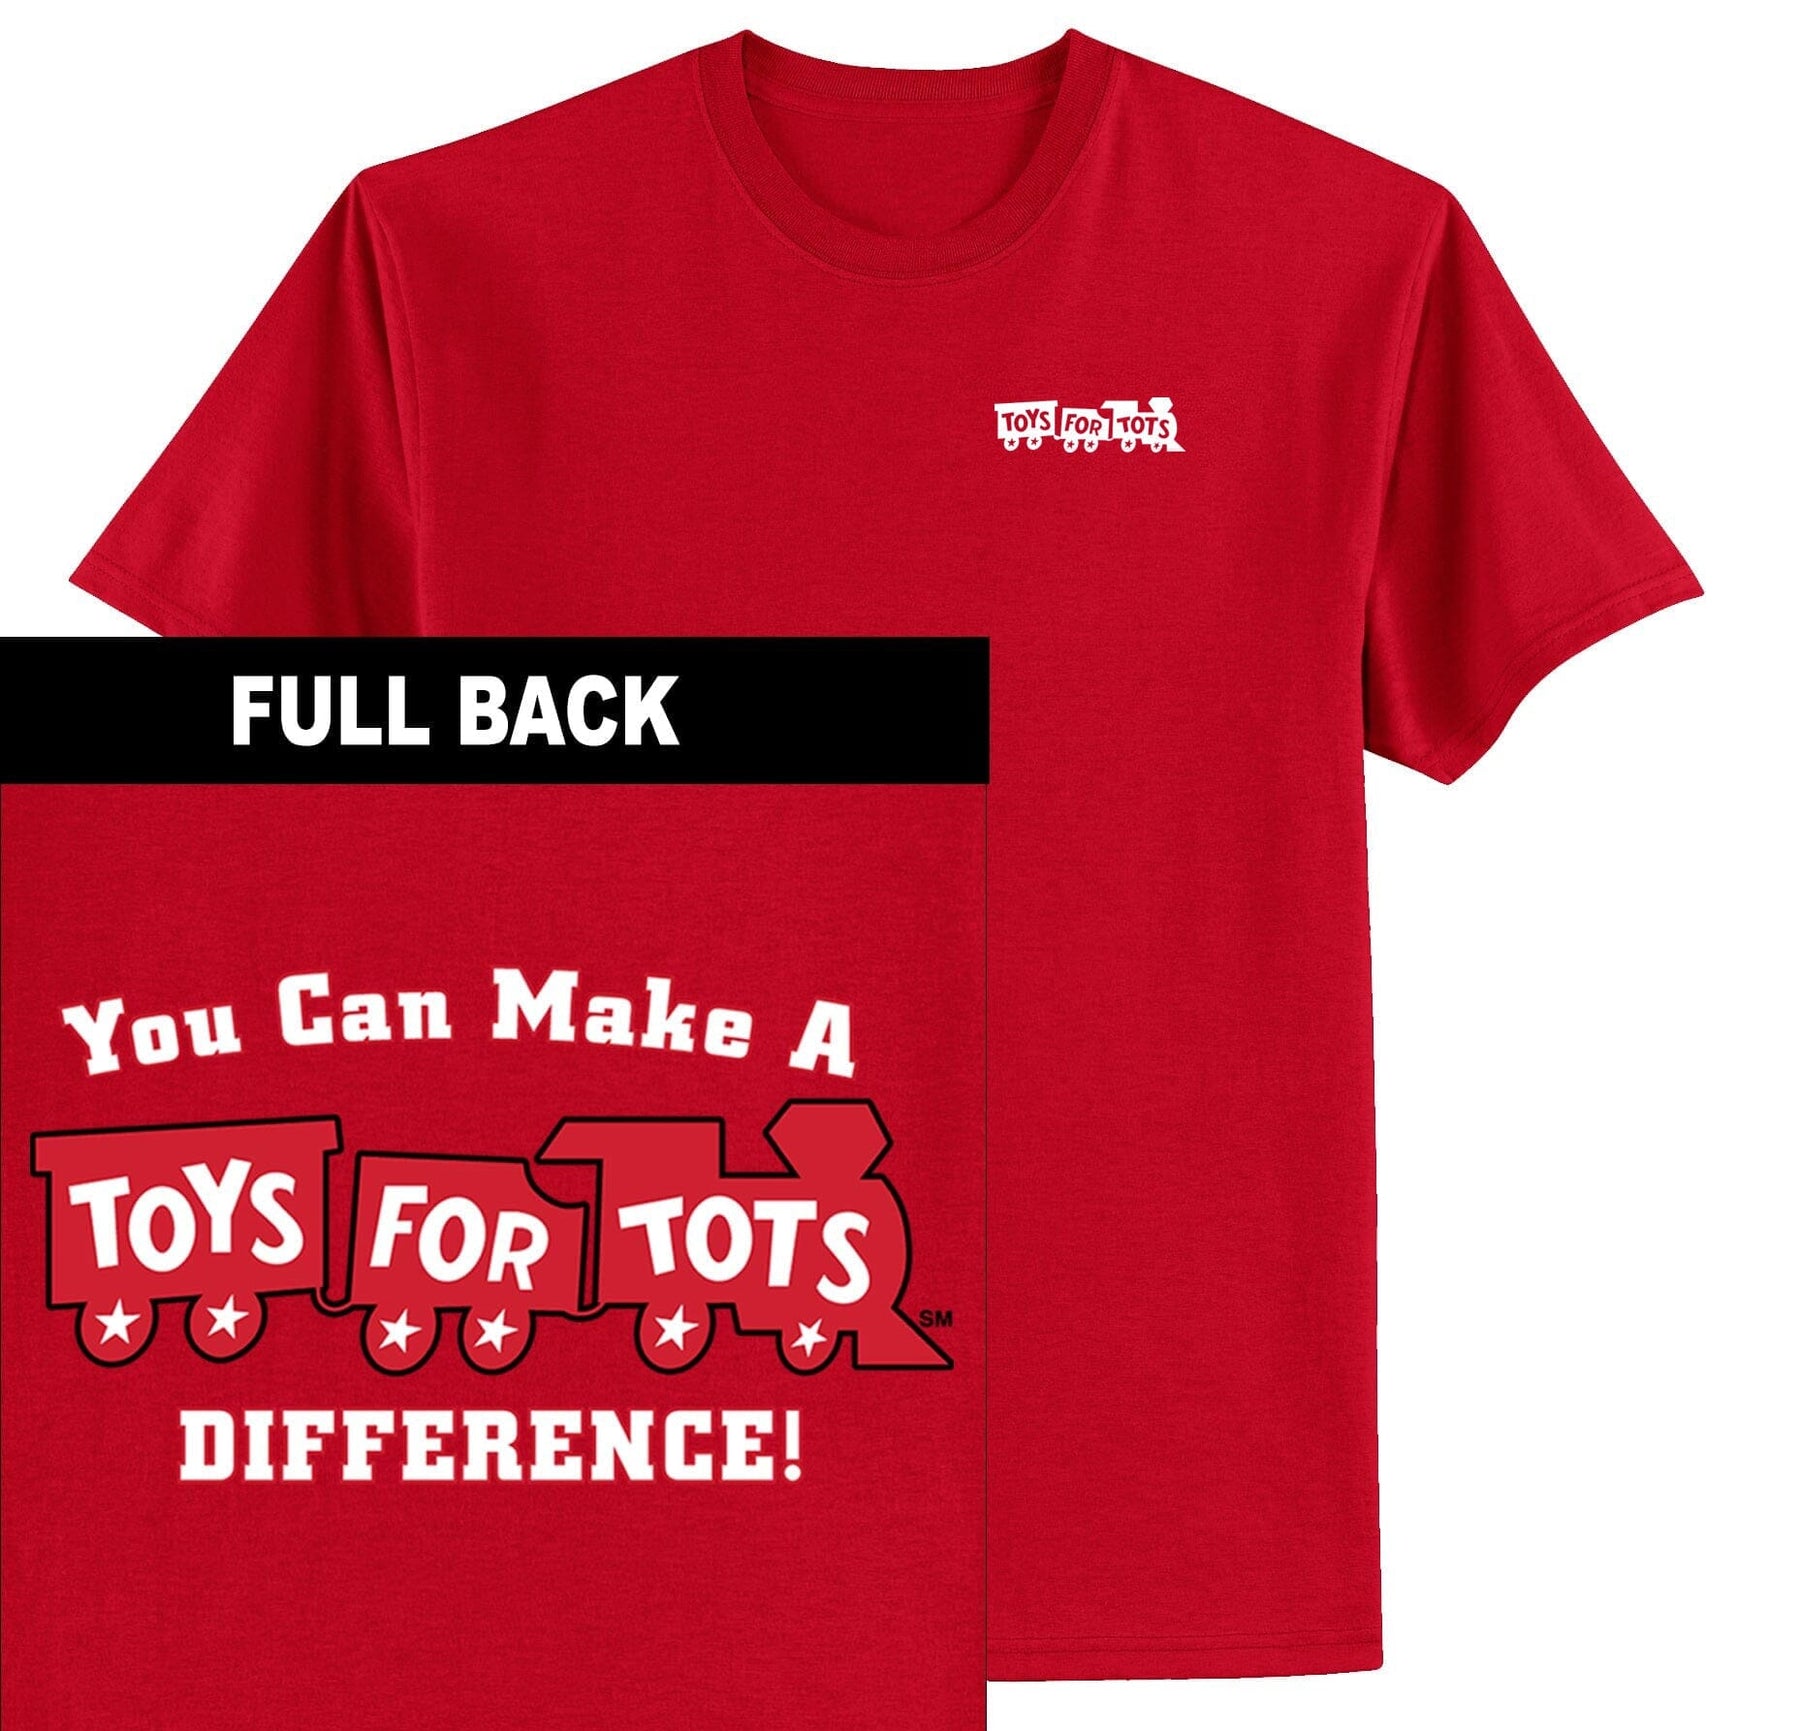 Make a Difference TFT Train 2-Sided T-Shirt TFT Shirt marinecorpsdirecttft S RED 